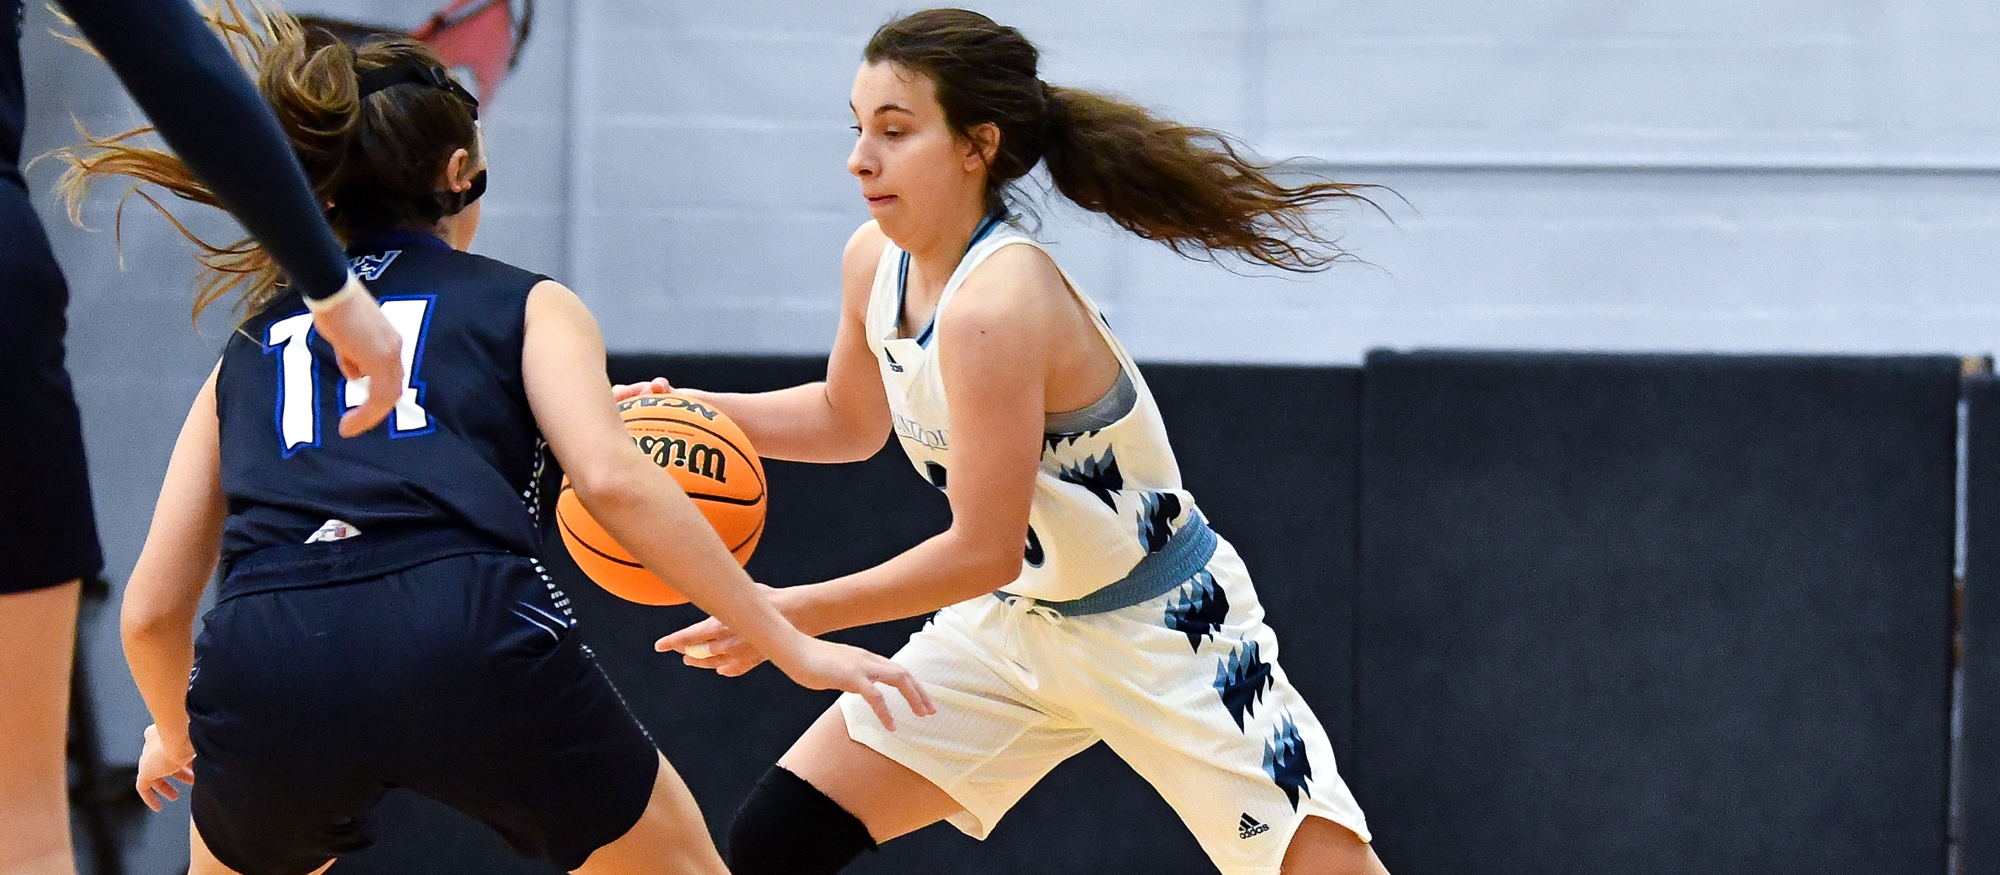 Alex Twomey hit the 20-point mark for the third time this season in Mount Holyoke's 64-37 loss to Connecticut College on Dec. 10, 2022. (RJB Sports file photo)